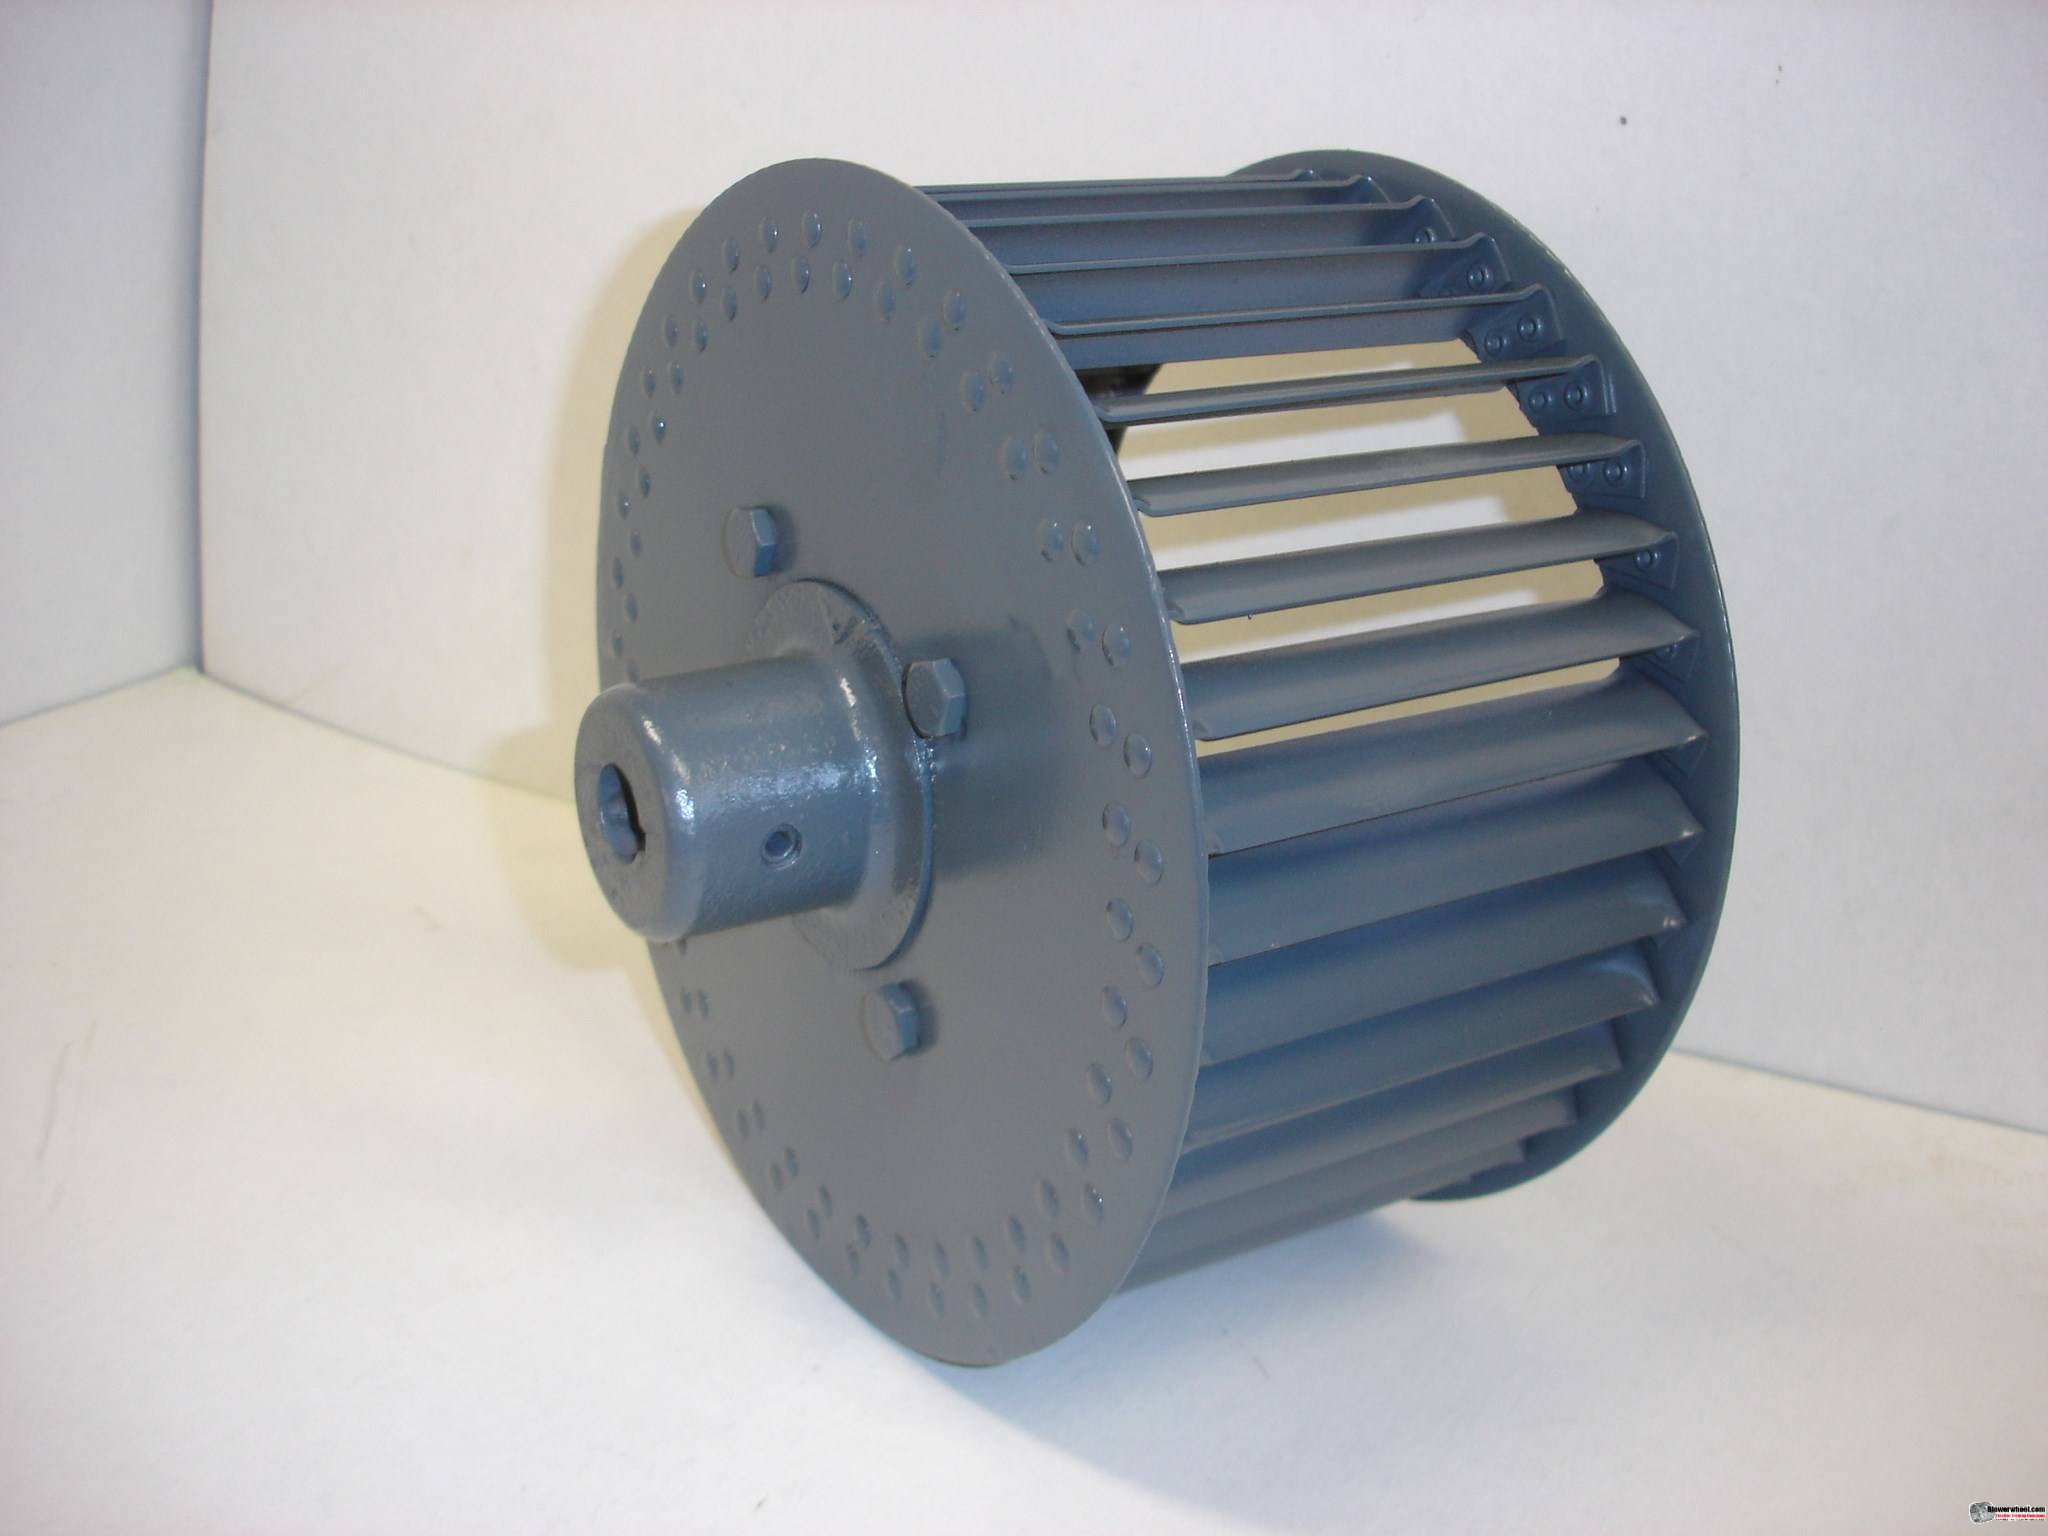 Single Inlet Aluminum Blower Wheel 10-13/16" Diameter 4-3/8" Width 5/8" Bore Clockwise rotation with an Outside Hub